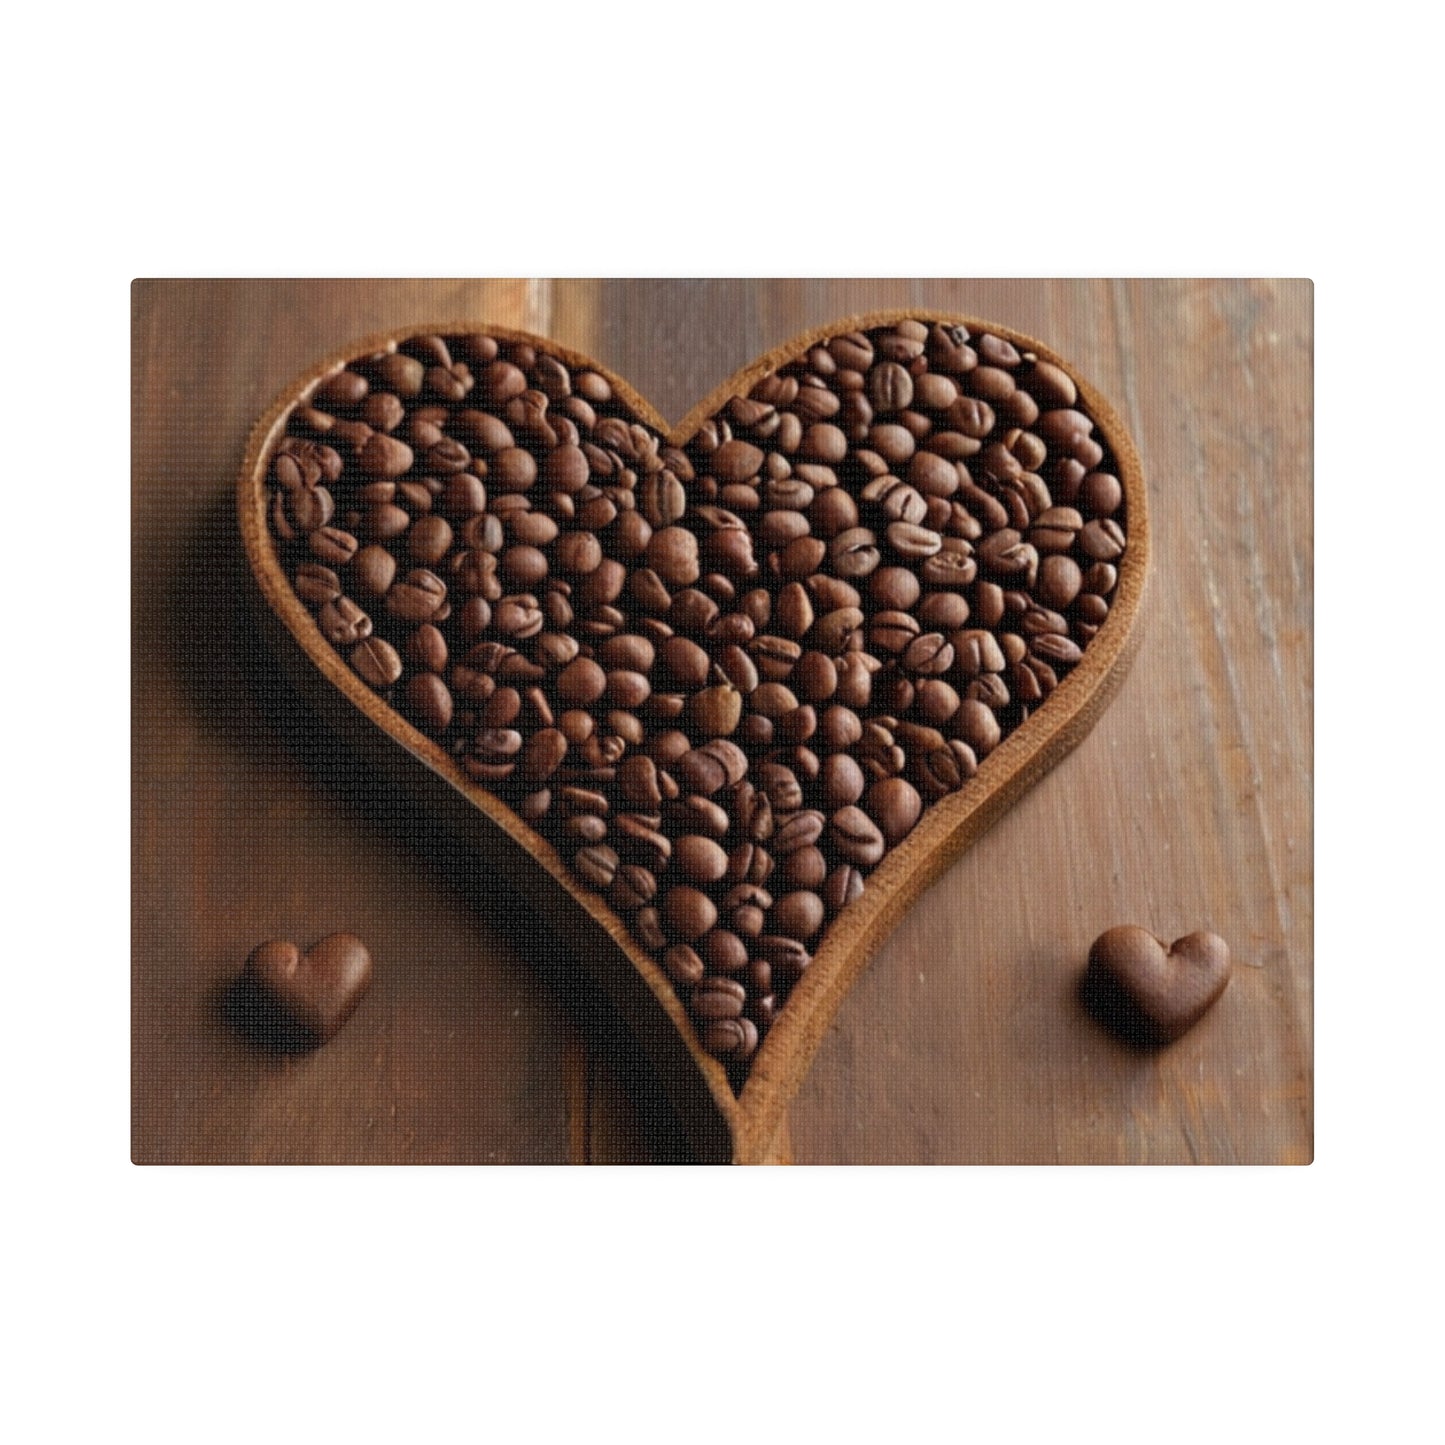 Love Hearts Made Out Of Coffee Beans - Matte Canvas, Stretched, 0.75"